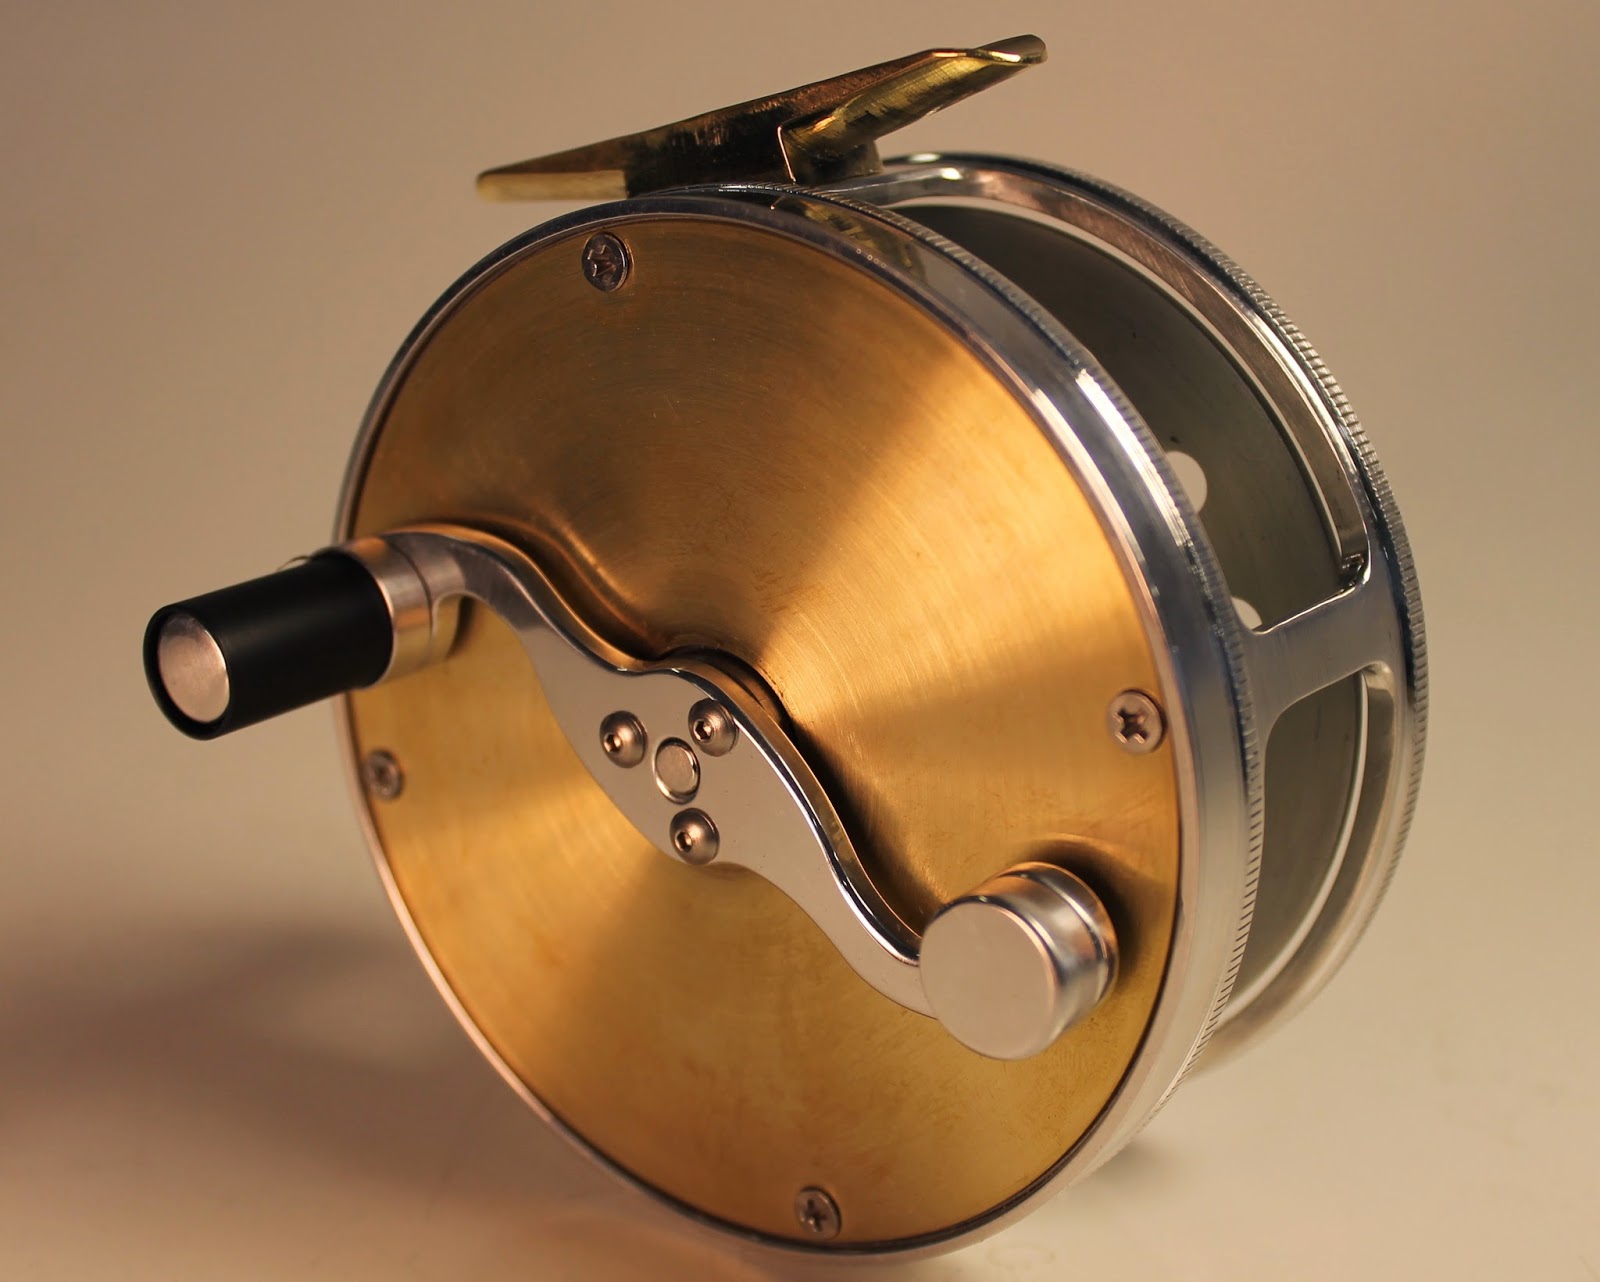 Skagit 4 inch Brass and Silver Salmon Reel - Saltwater on the Fly